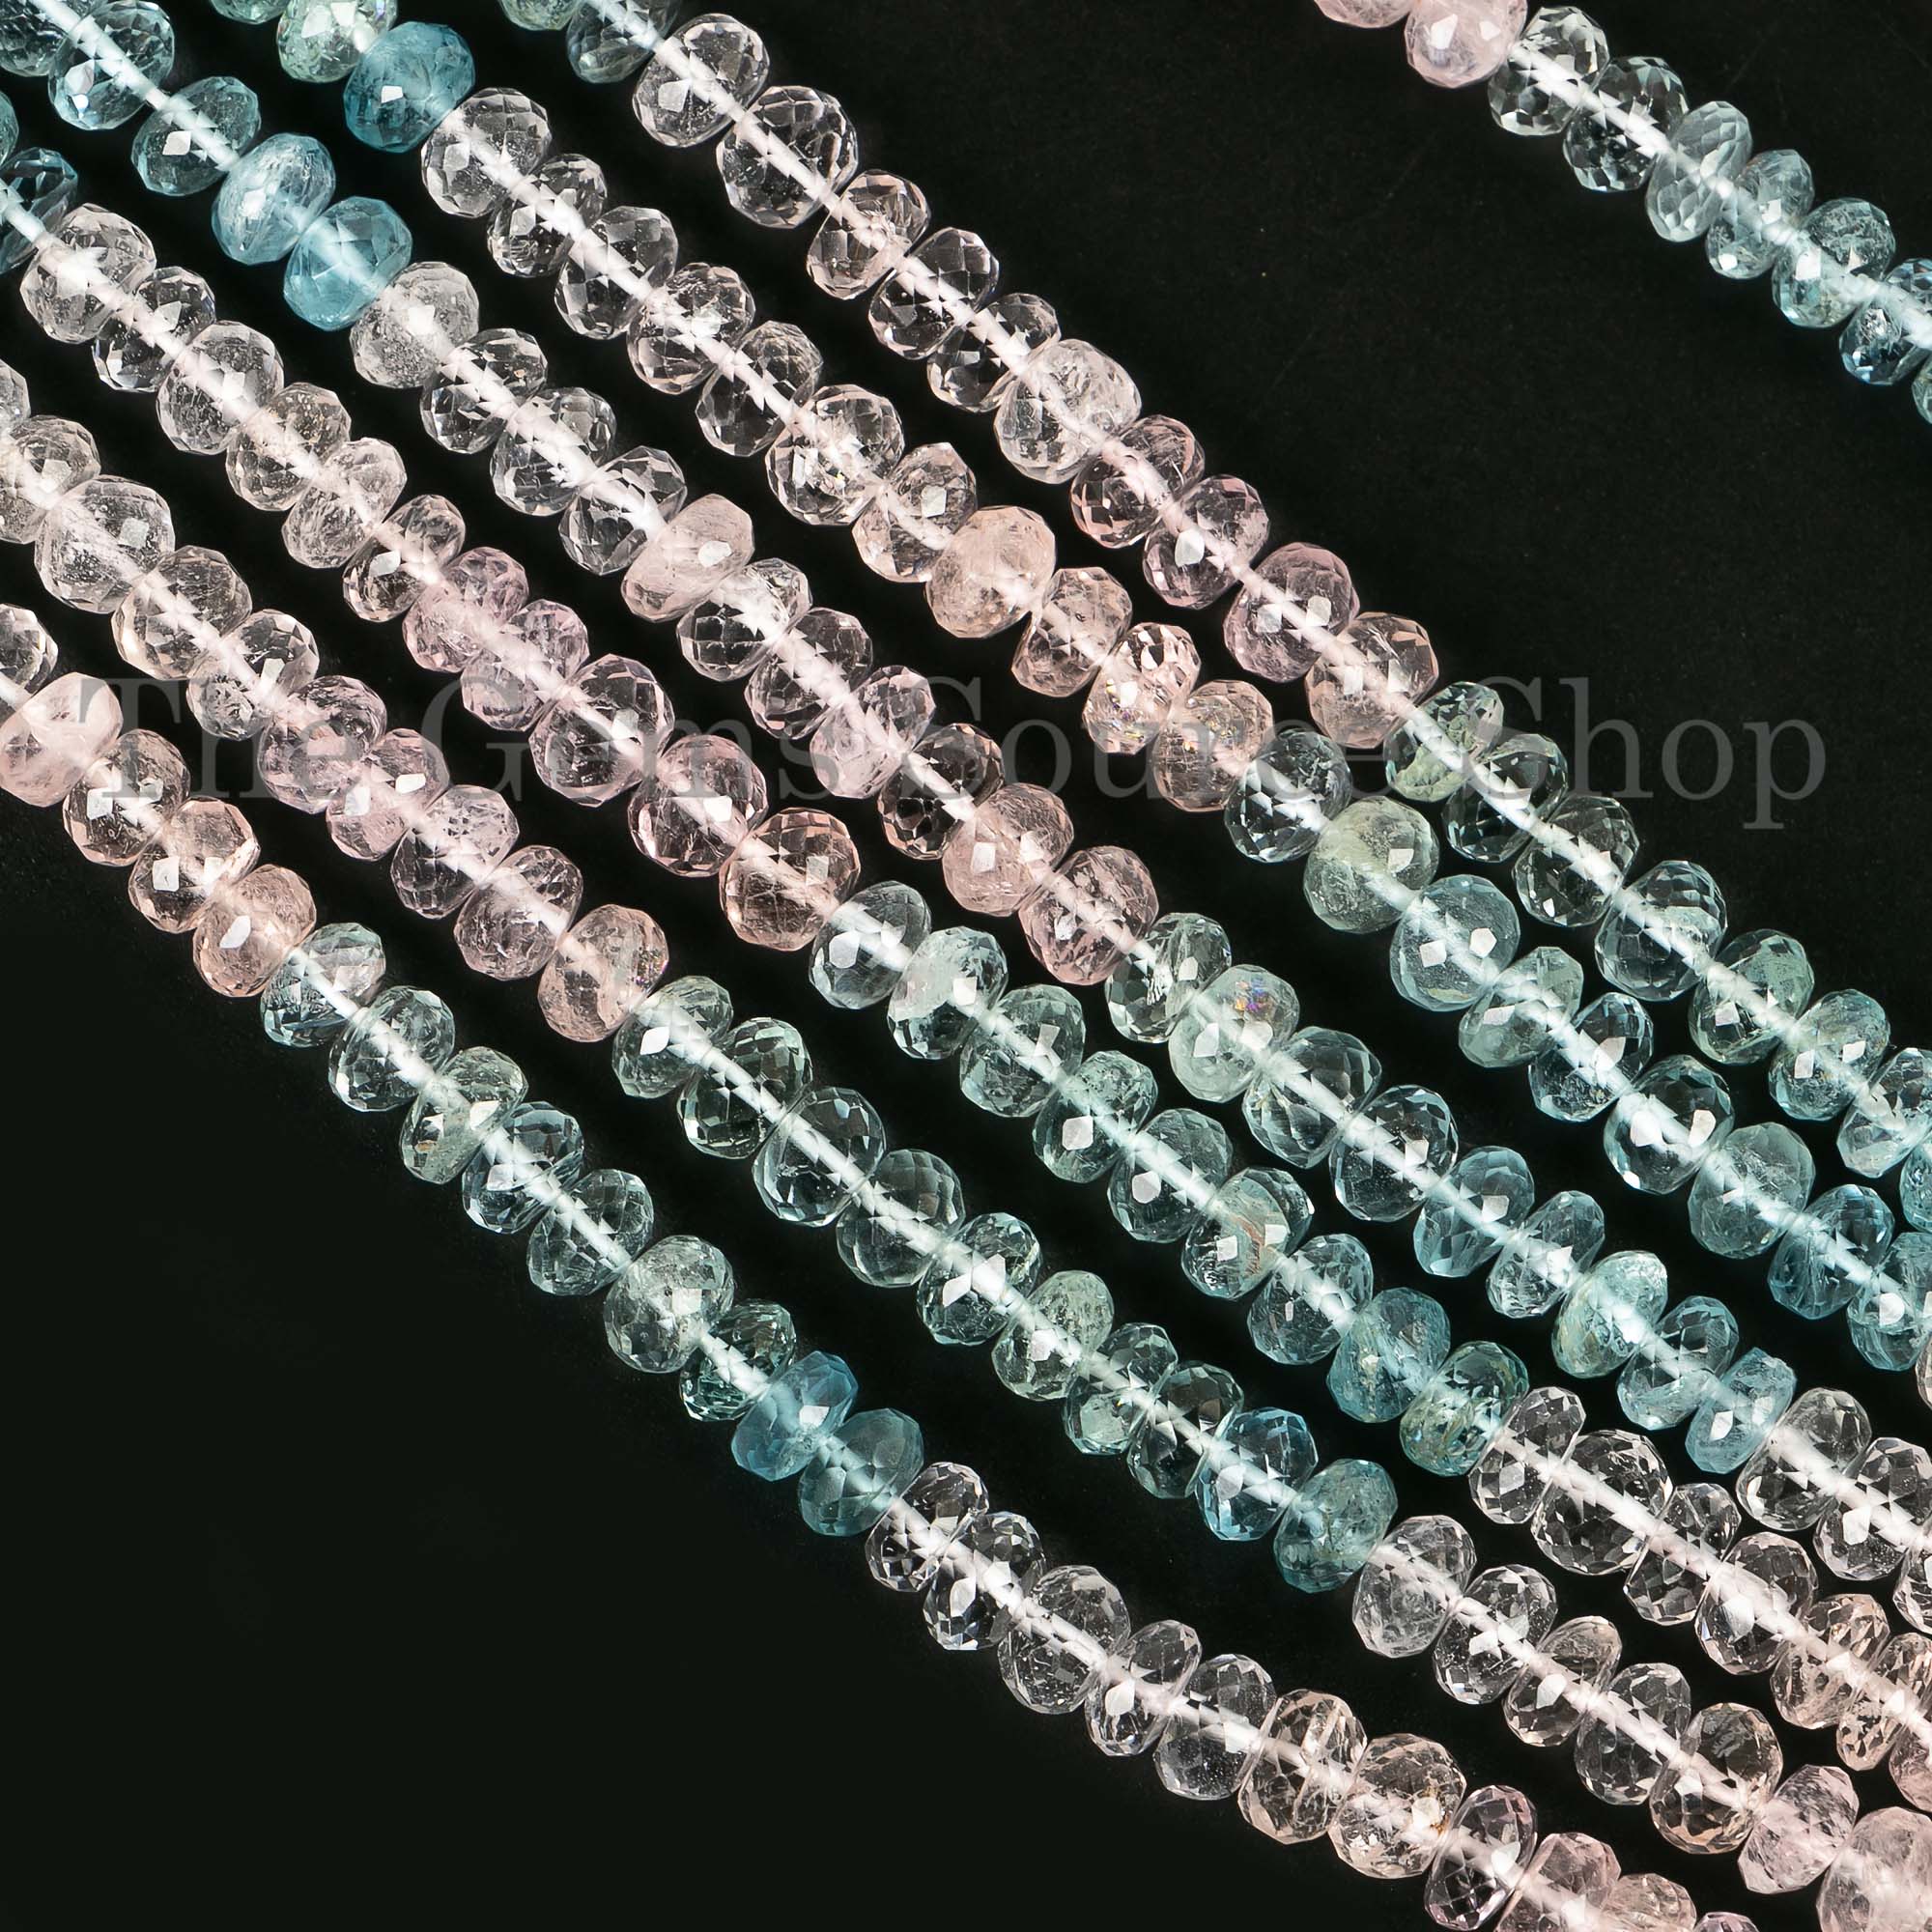 5.25-5.5mm Aquamarine Morganite Faceted Rondelle, Aquamarine Faceted Beads, Morganite Rondelle Beads, Aquamarine Gemstone Beads For Jewelry